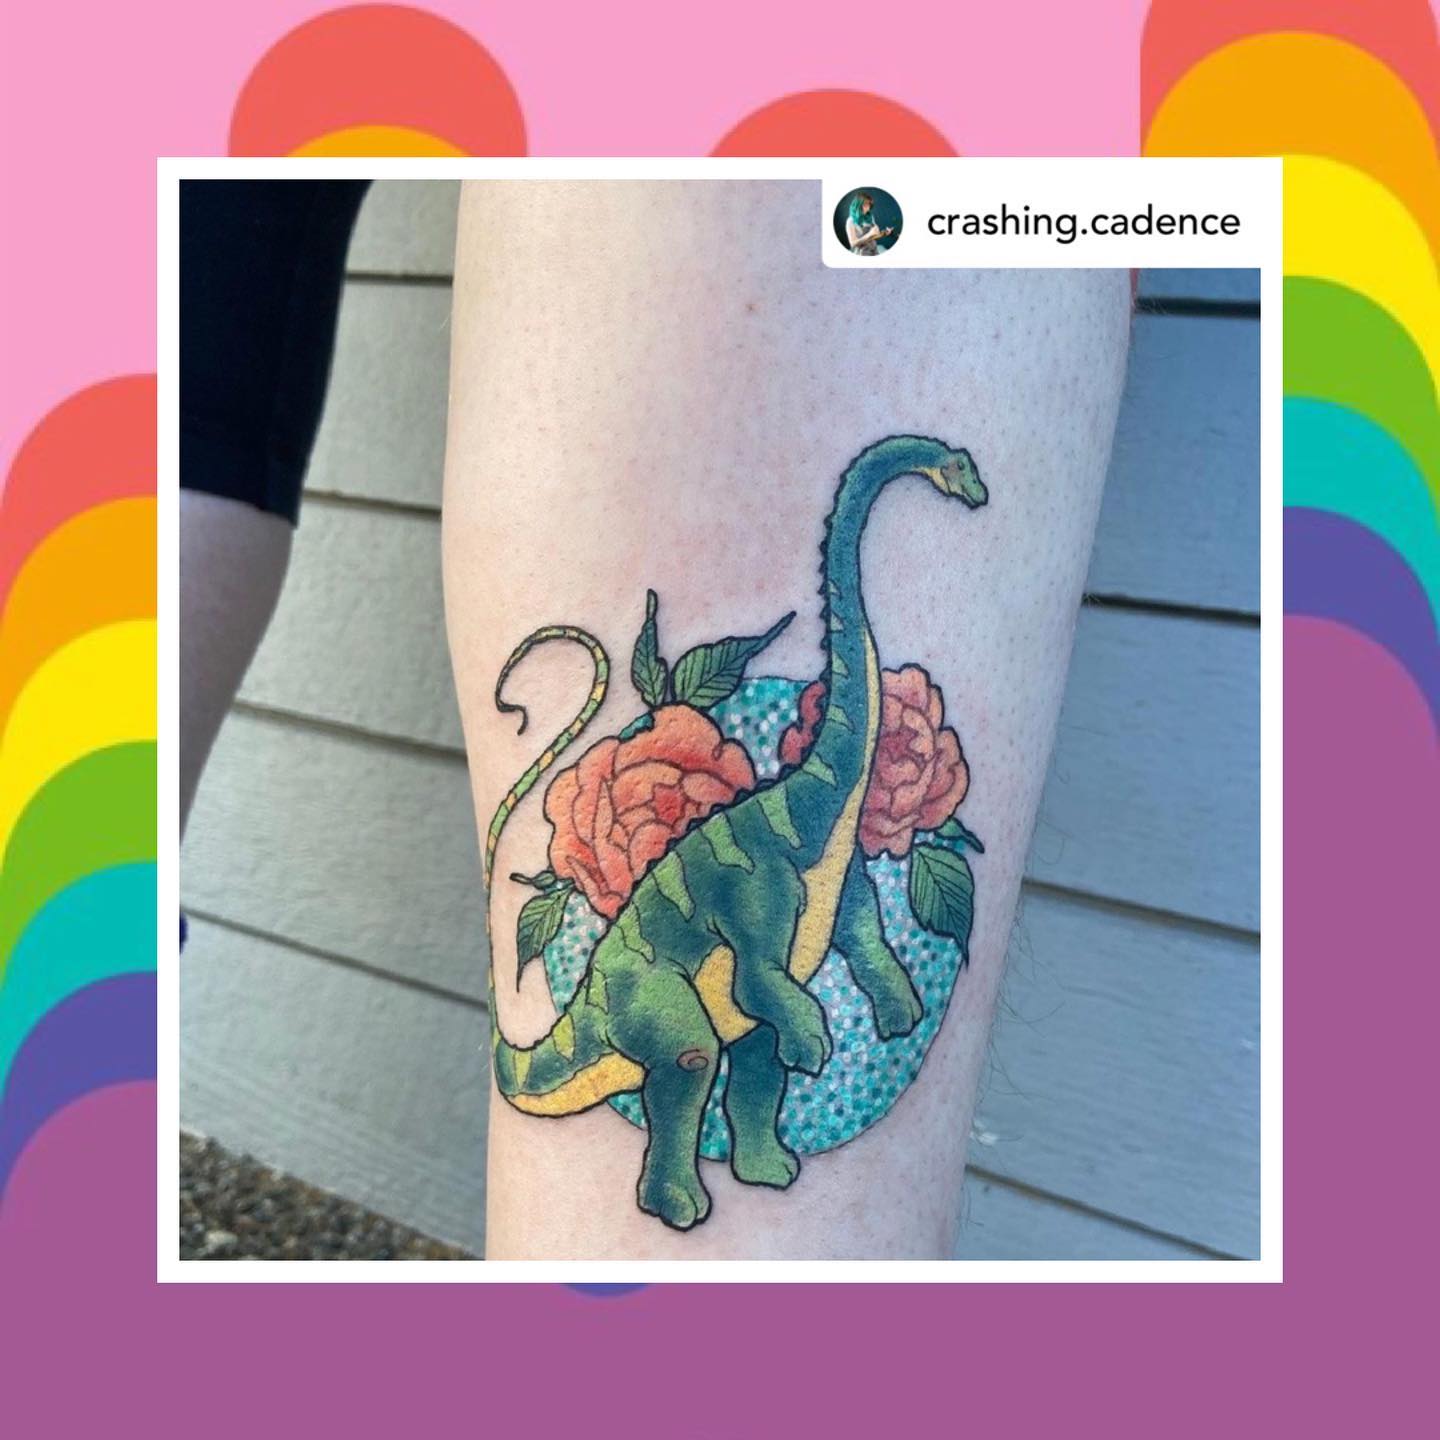 Did you know that @crashing.cadence does a semi-regular guest spot here? They will be here April 19-20th and will be back June 29-30th. Contact artist directly to book time. 🦖